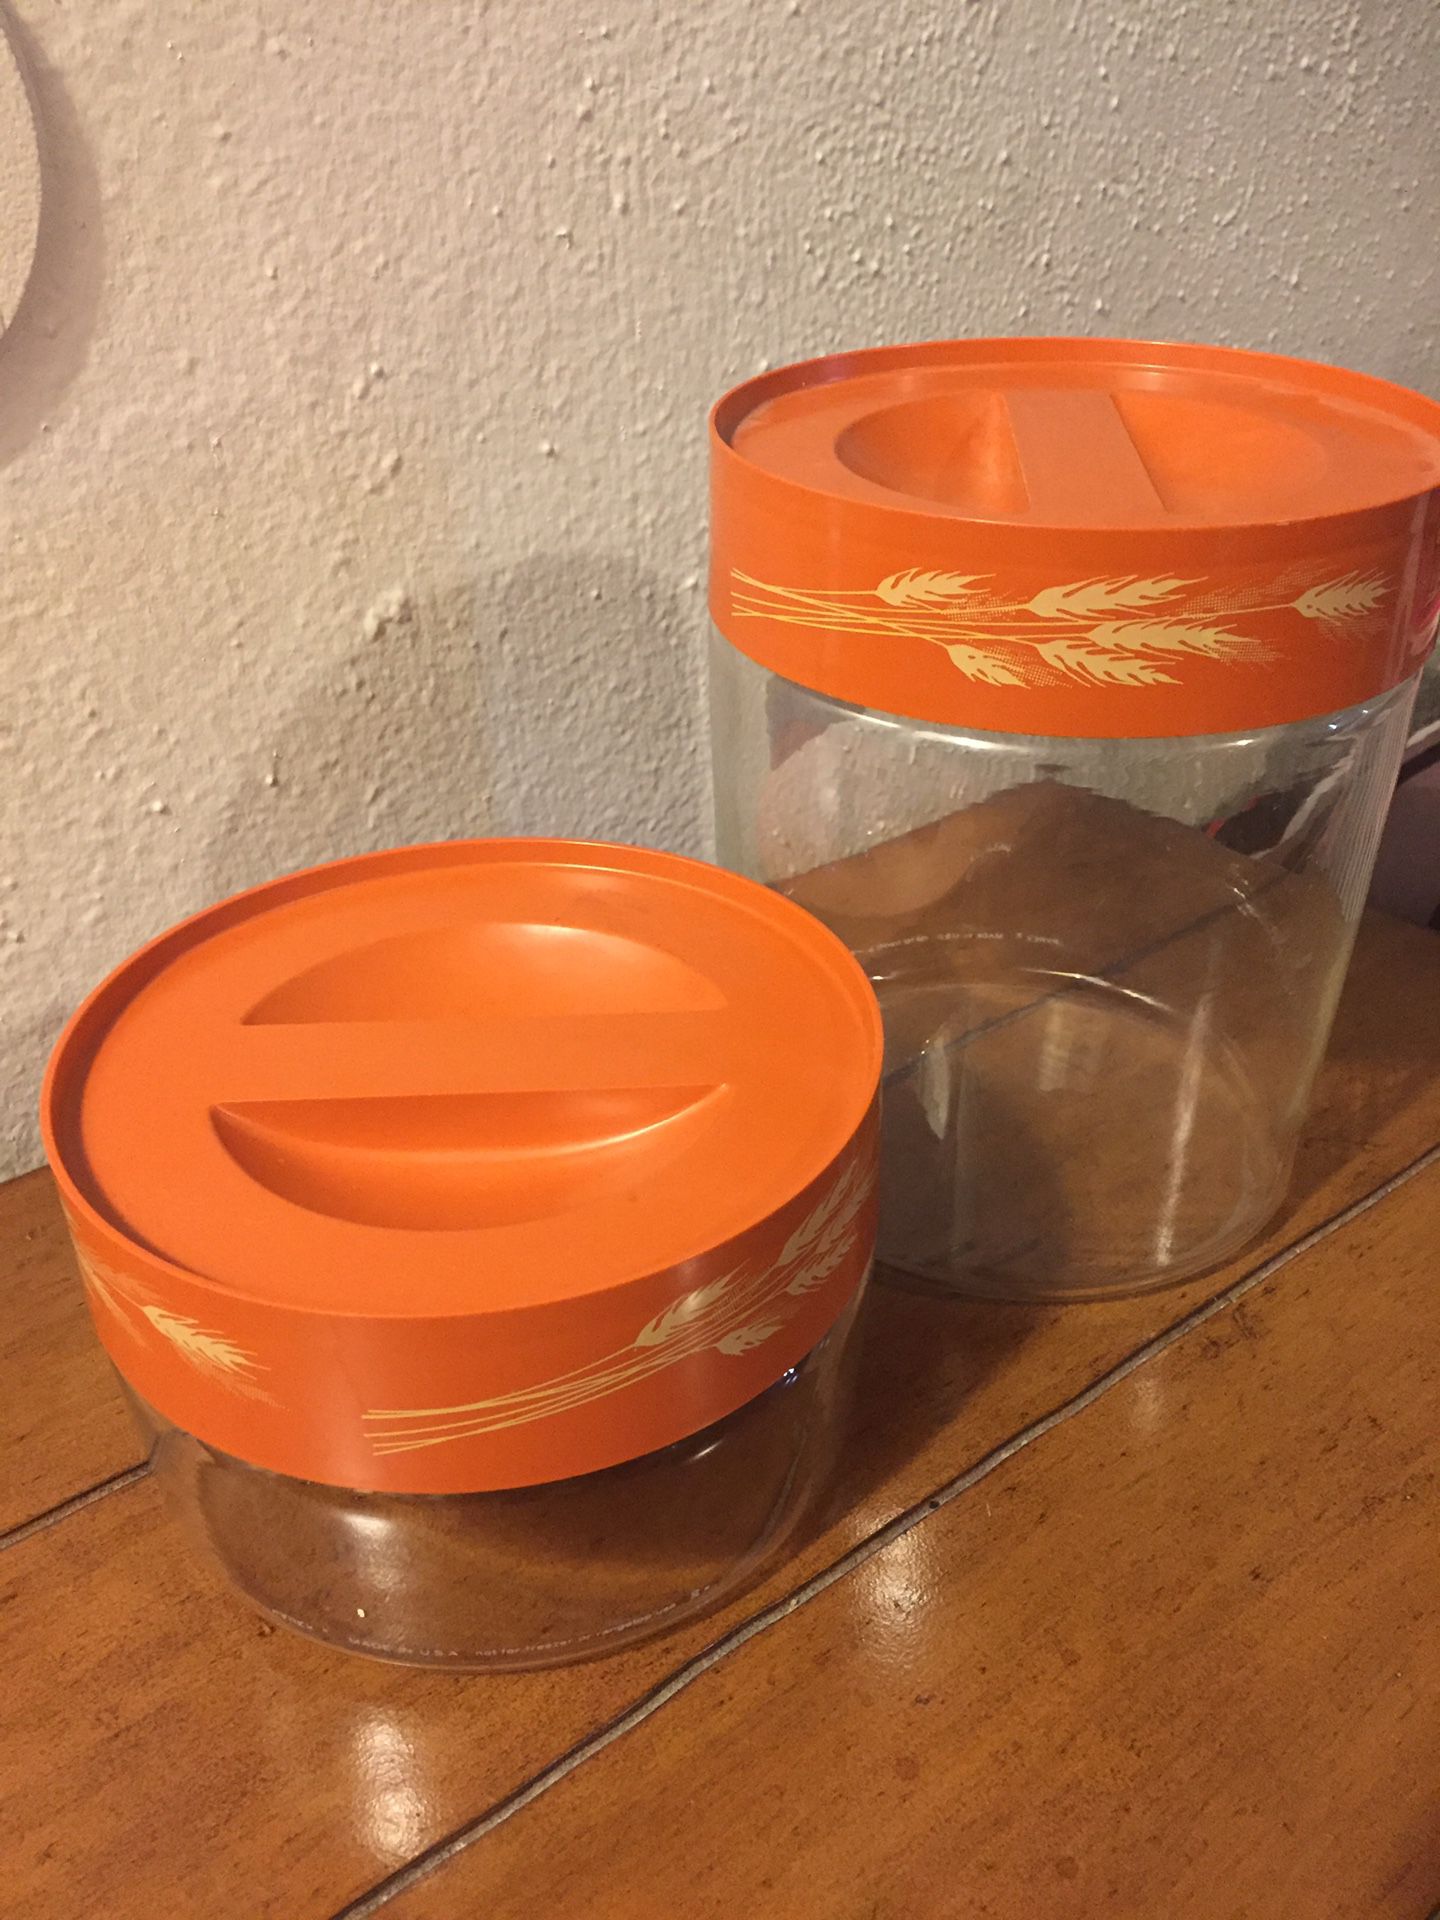 Vintage Pyrex Canisters